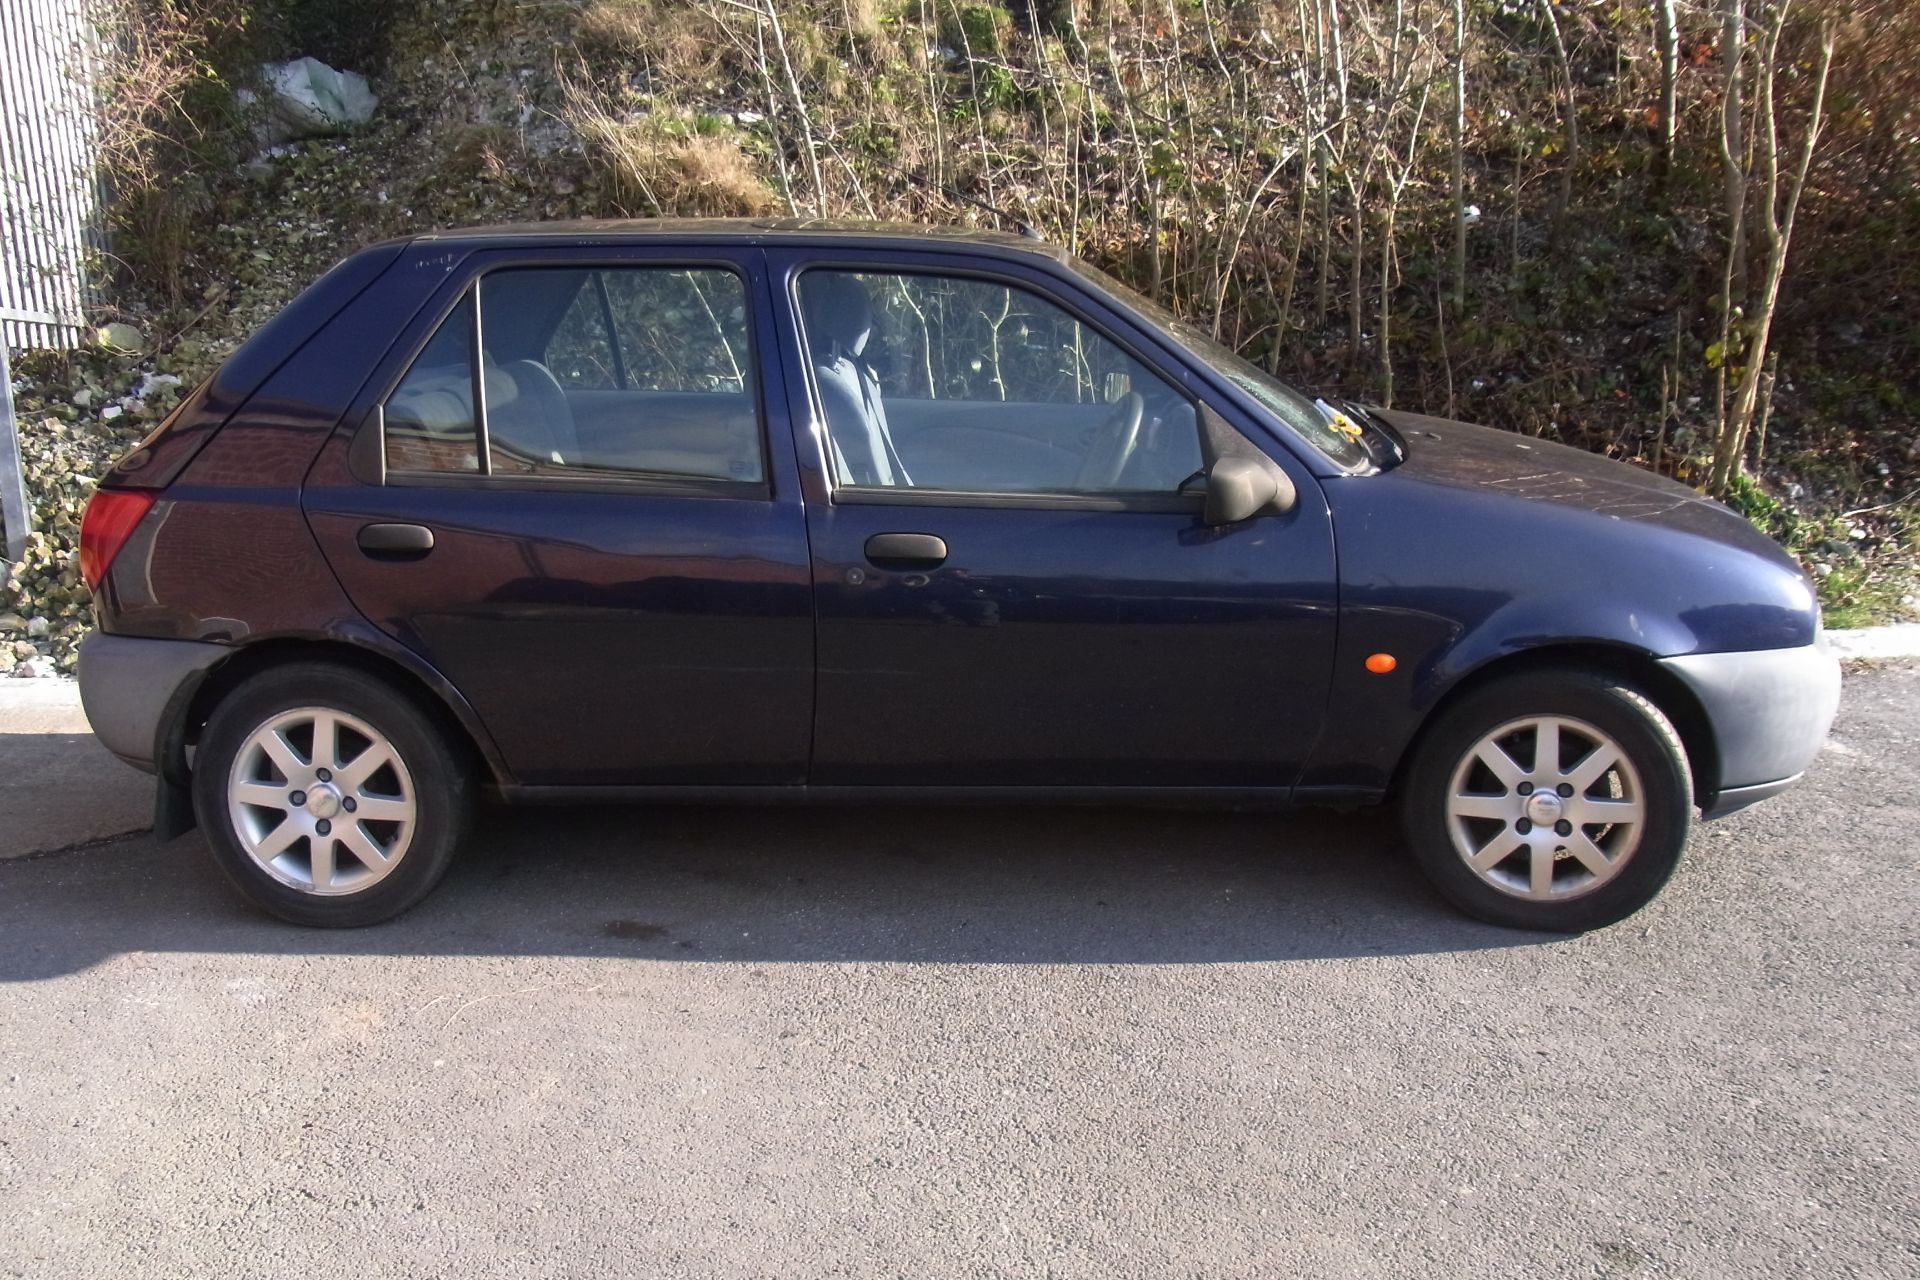 S110 CFE Ford Fiesta Finesse - No V5 - No Key - No Key
LICENCED ATF BIDDERS ONLY - Image 2 of 3